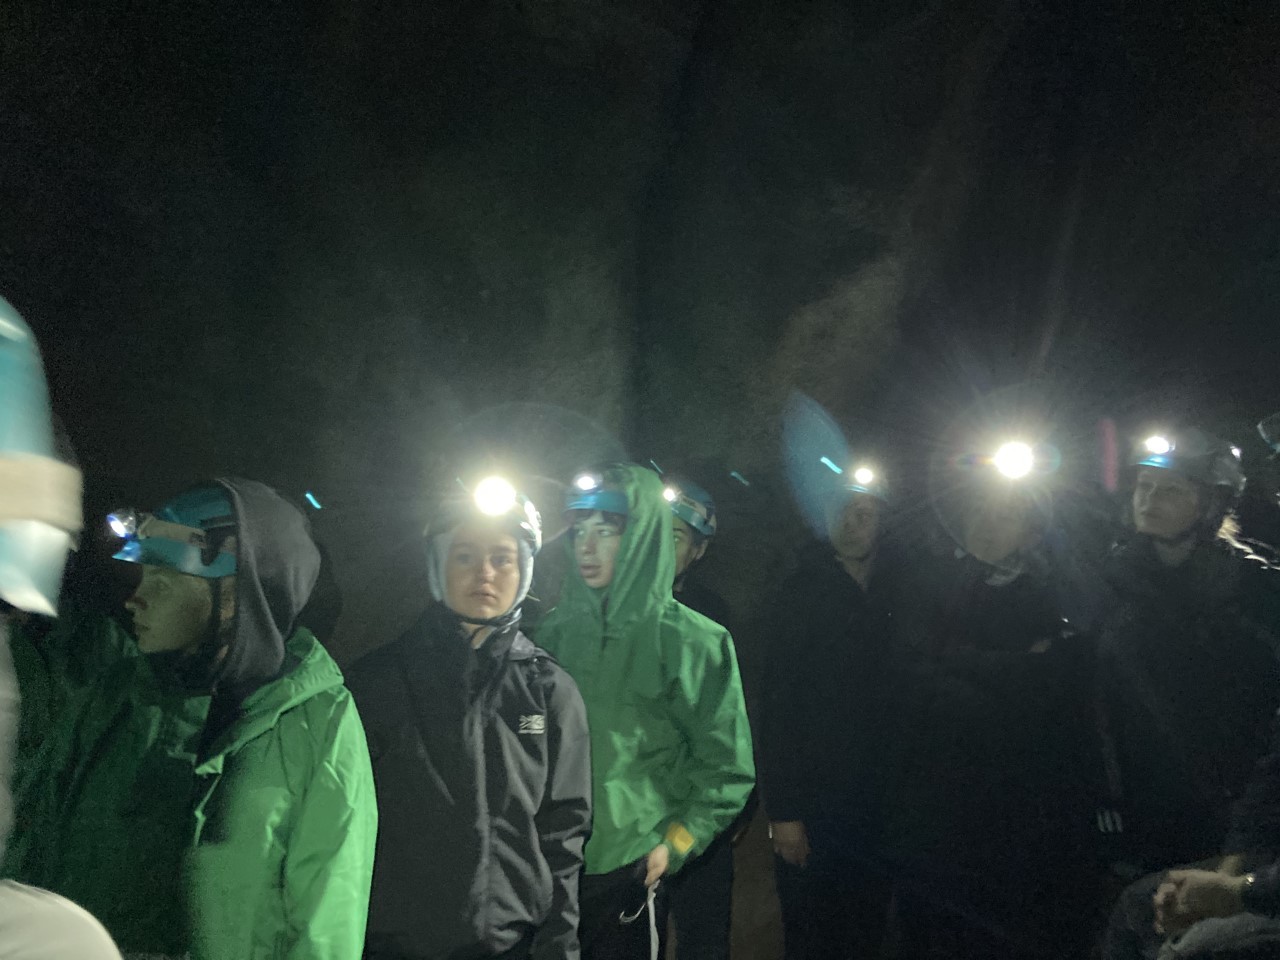 Flint High School students brave the dark to explore the caves.